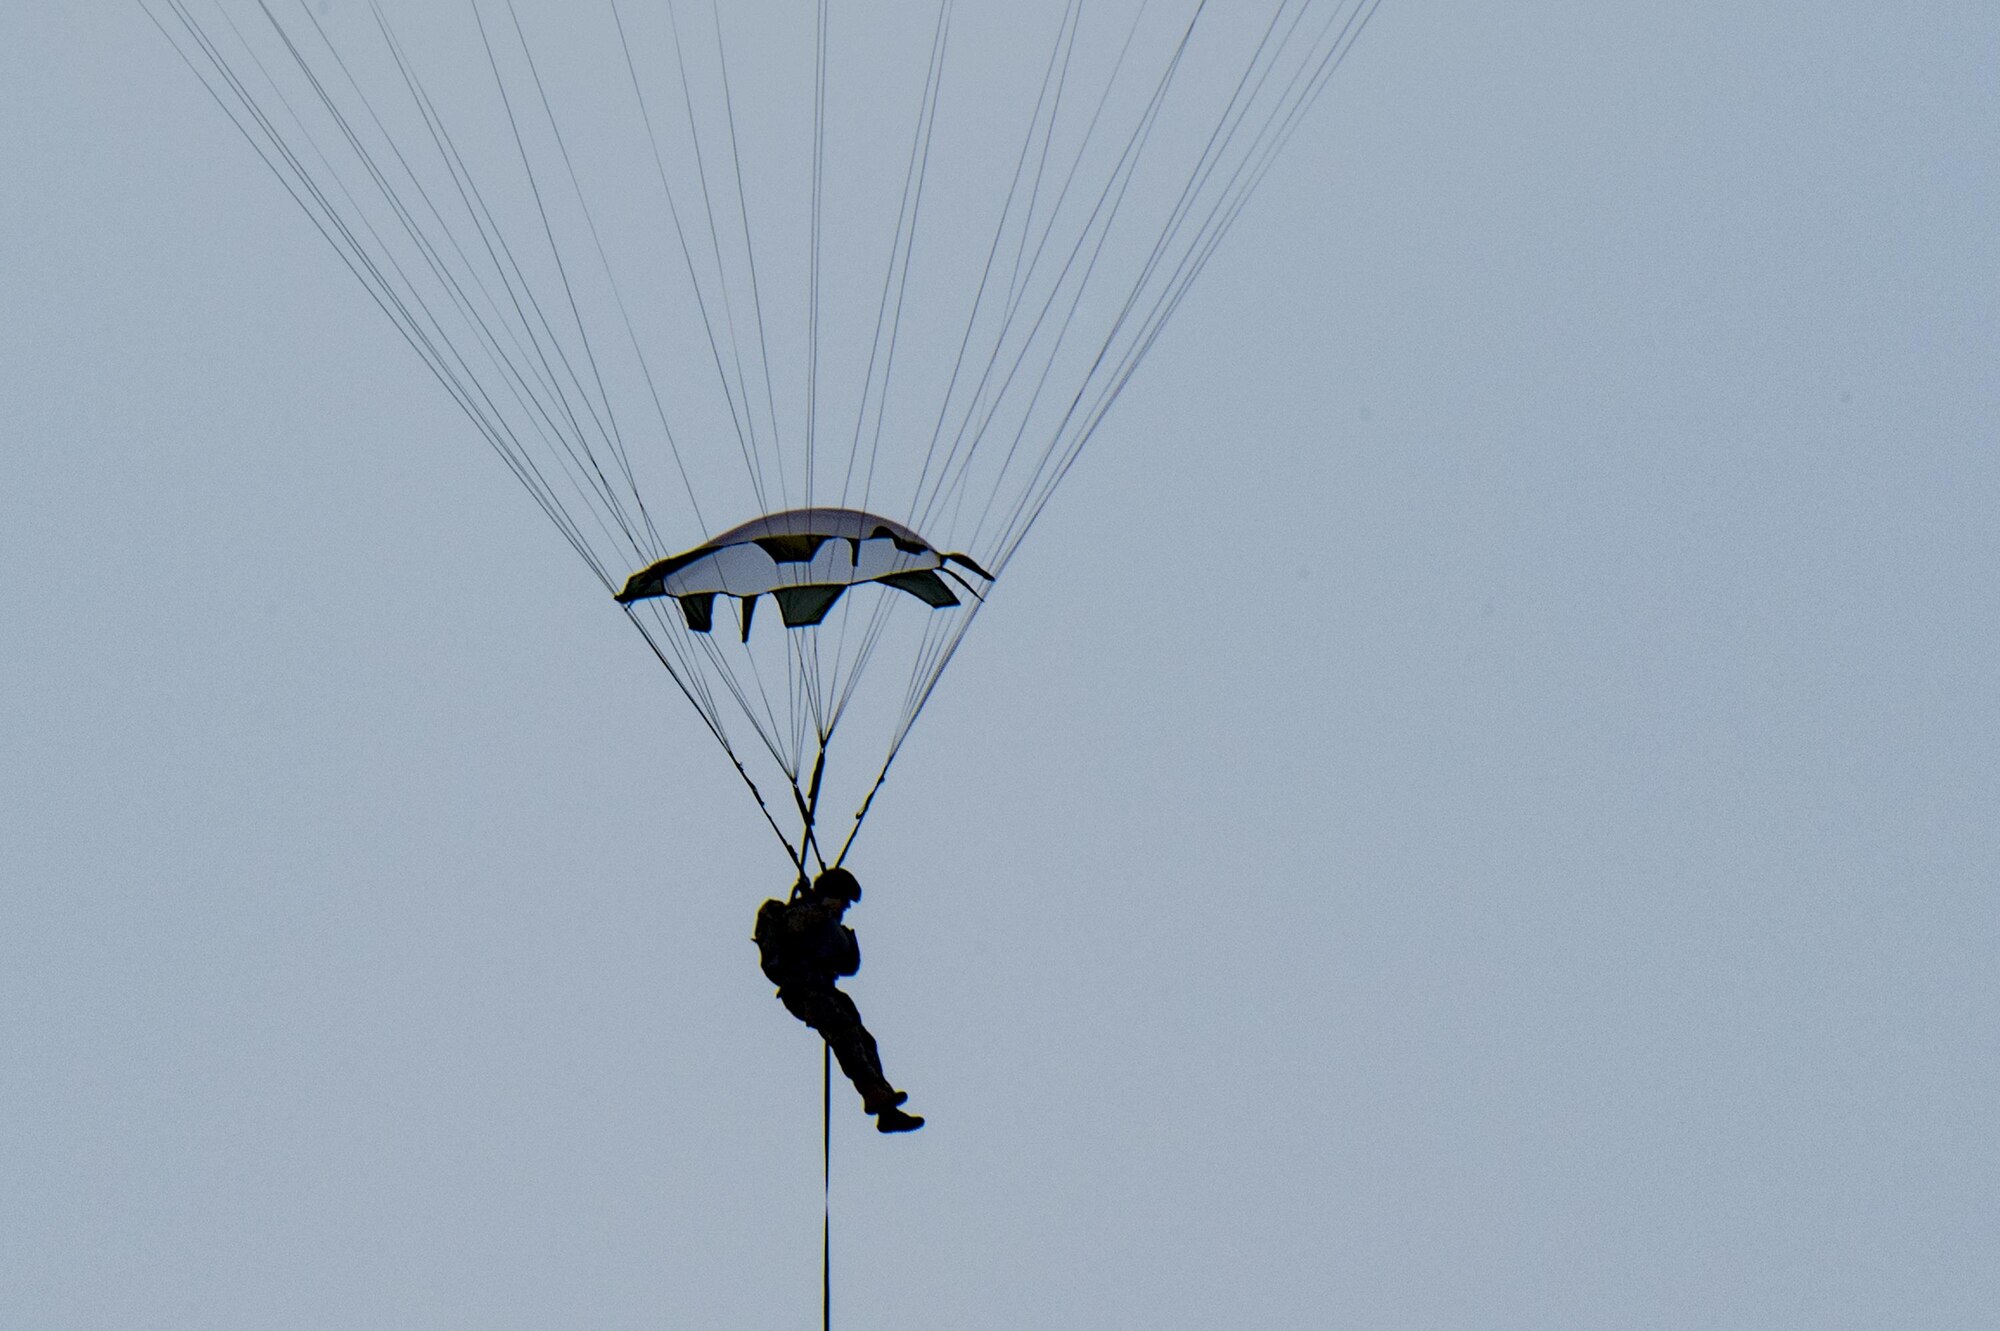 A member of the 823d Base Defense Squadron glides toward the ground, July 21, 2017, at the Lee Fulp Drop Zone in Tifton, Ga. This training was in preparation for an upcoming mission readiness exercise where airmen serve as an airborne advanced team, with the mission to create an initial presence and clear a path for follow-on forces to arrive on scene. (U.S. Air Force photo by Airman 1st Class Daniel Snider)